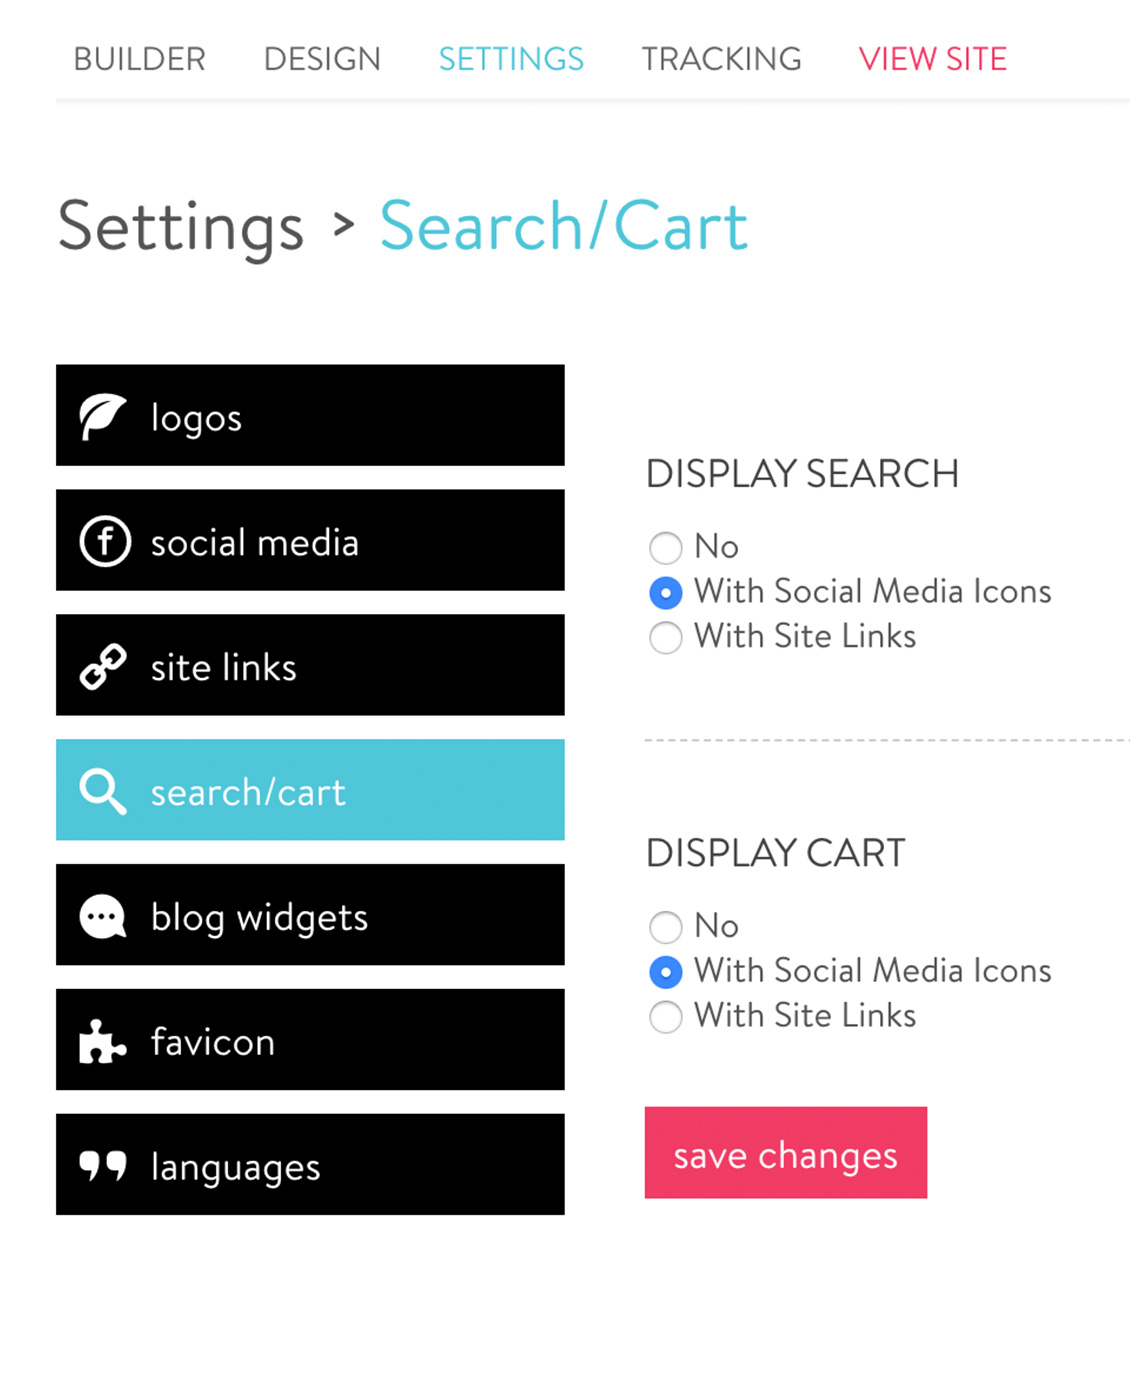 Display Search